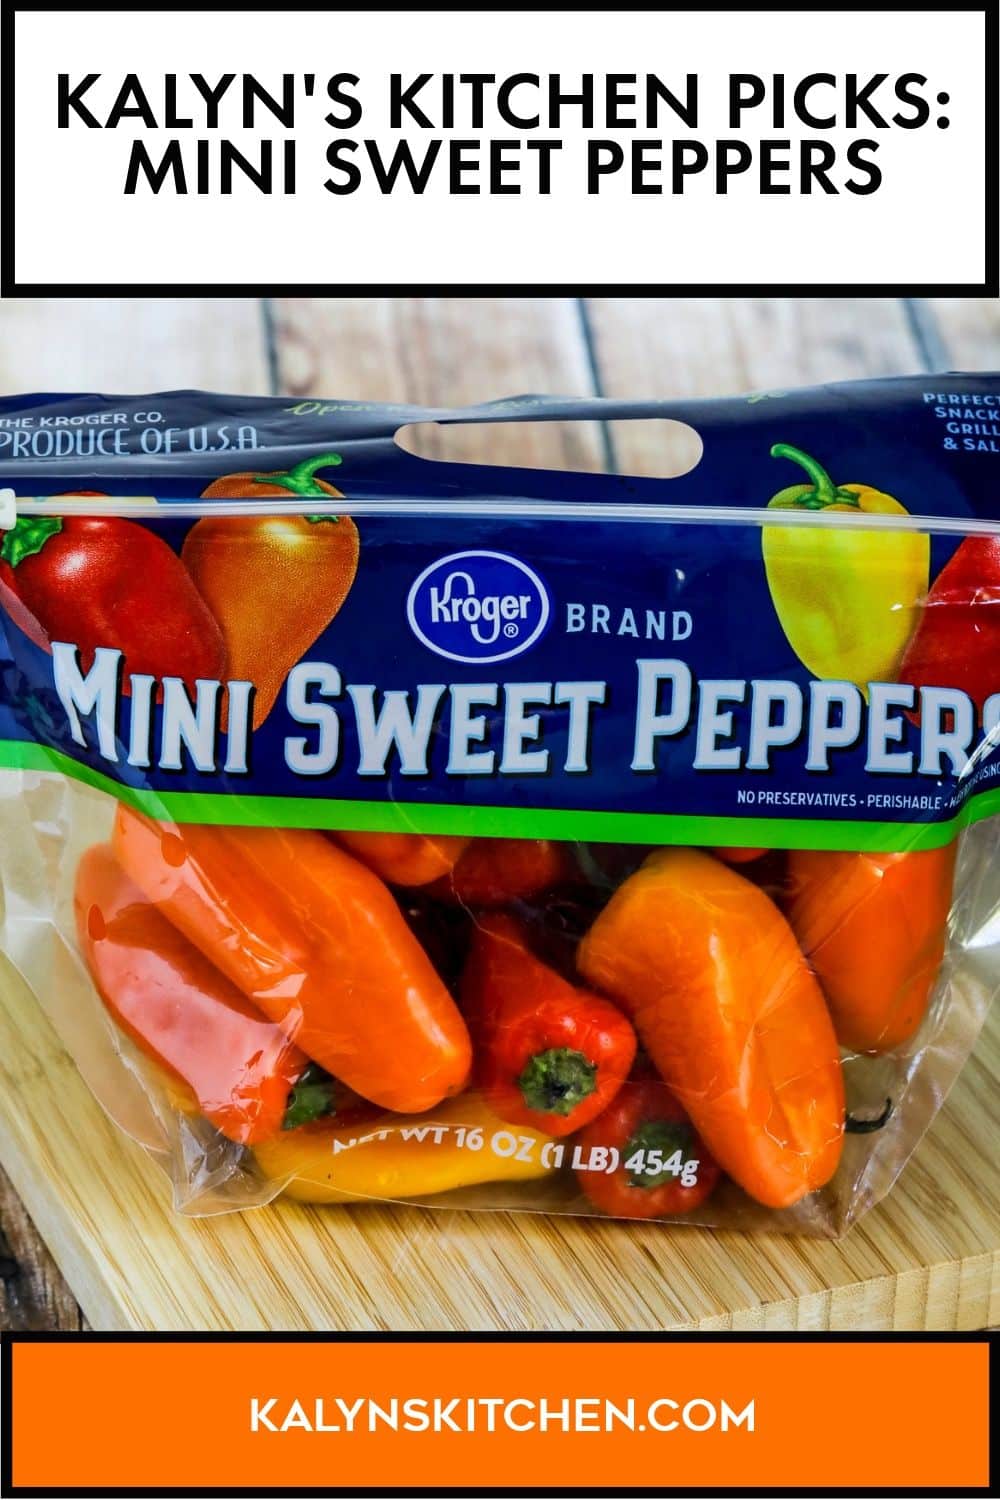 Pinterest image for Kalyn's Kitchen Picks: Mini Sweet Peppers, showing mini peppers in bag.